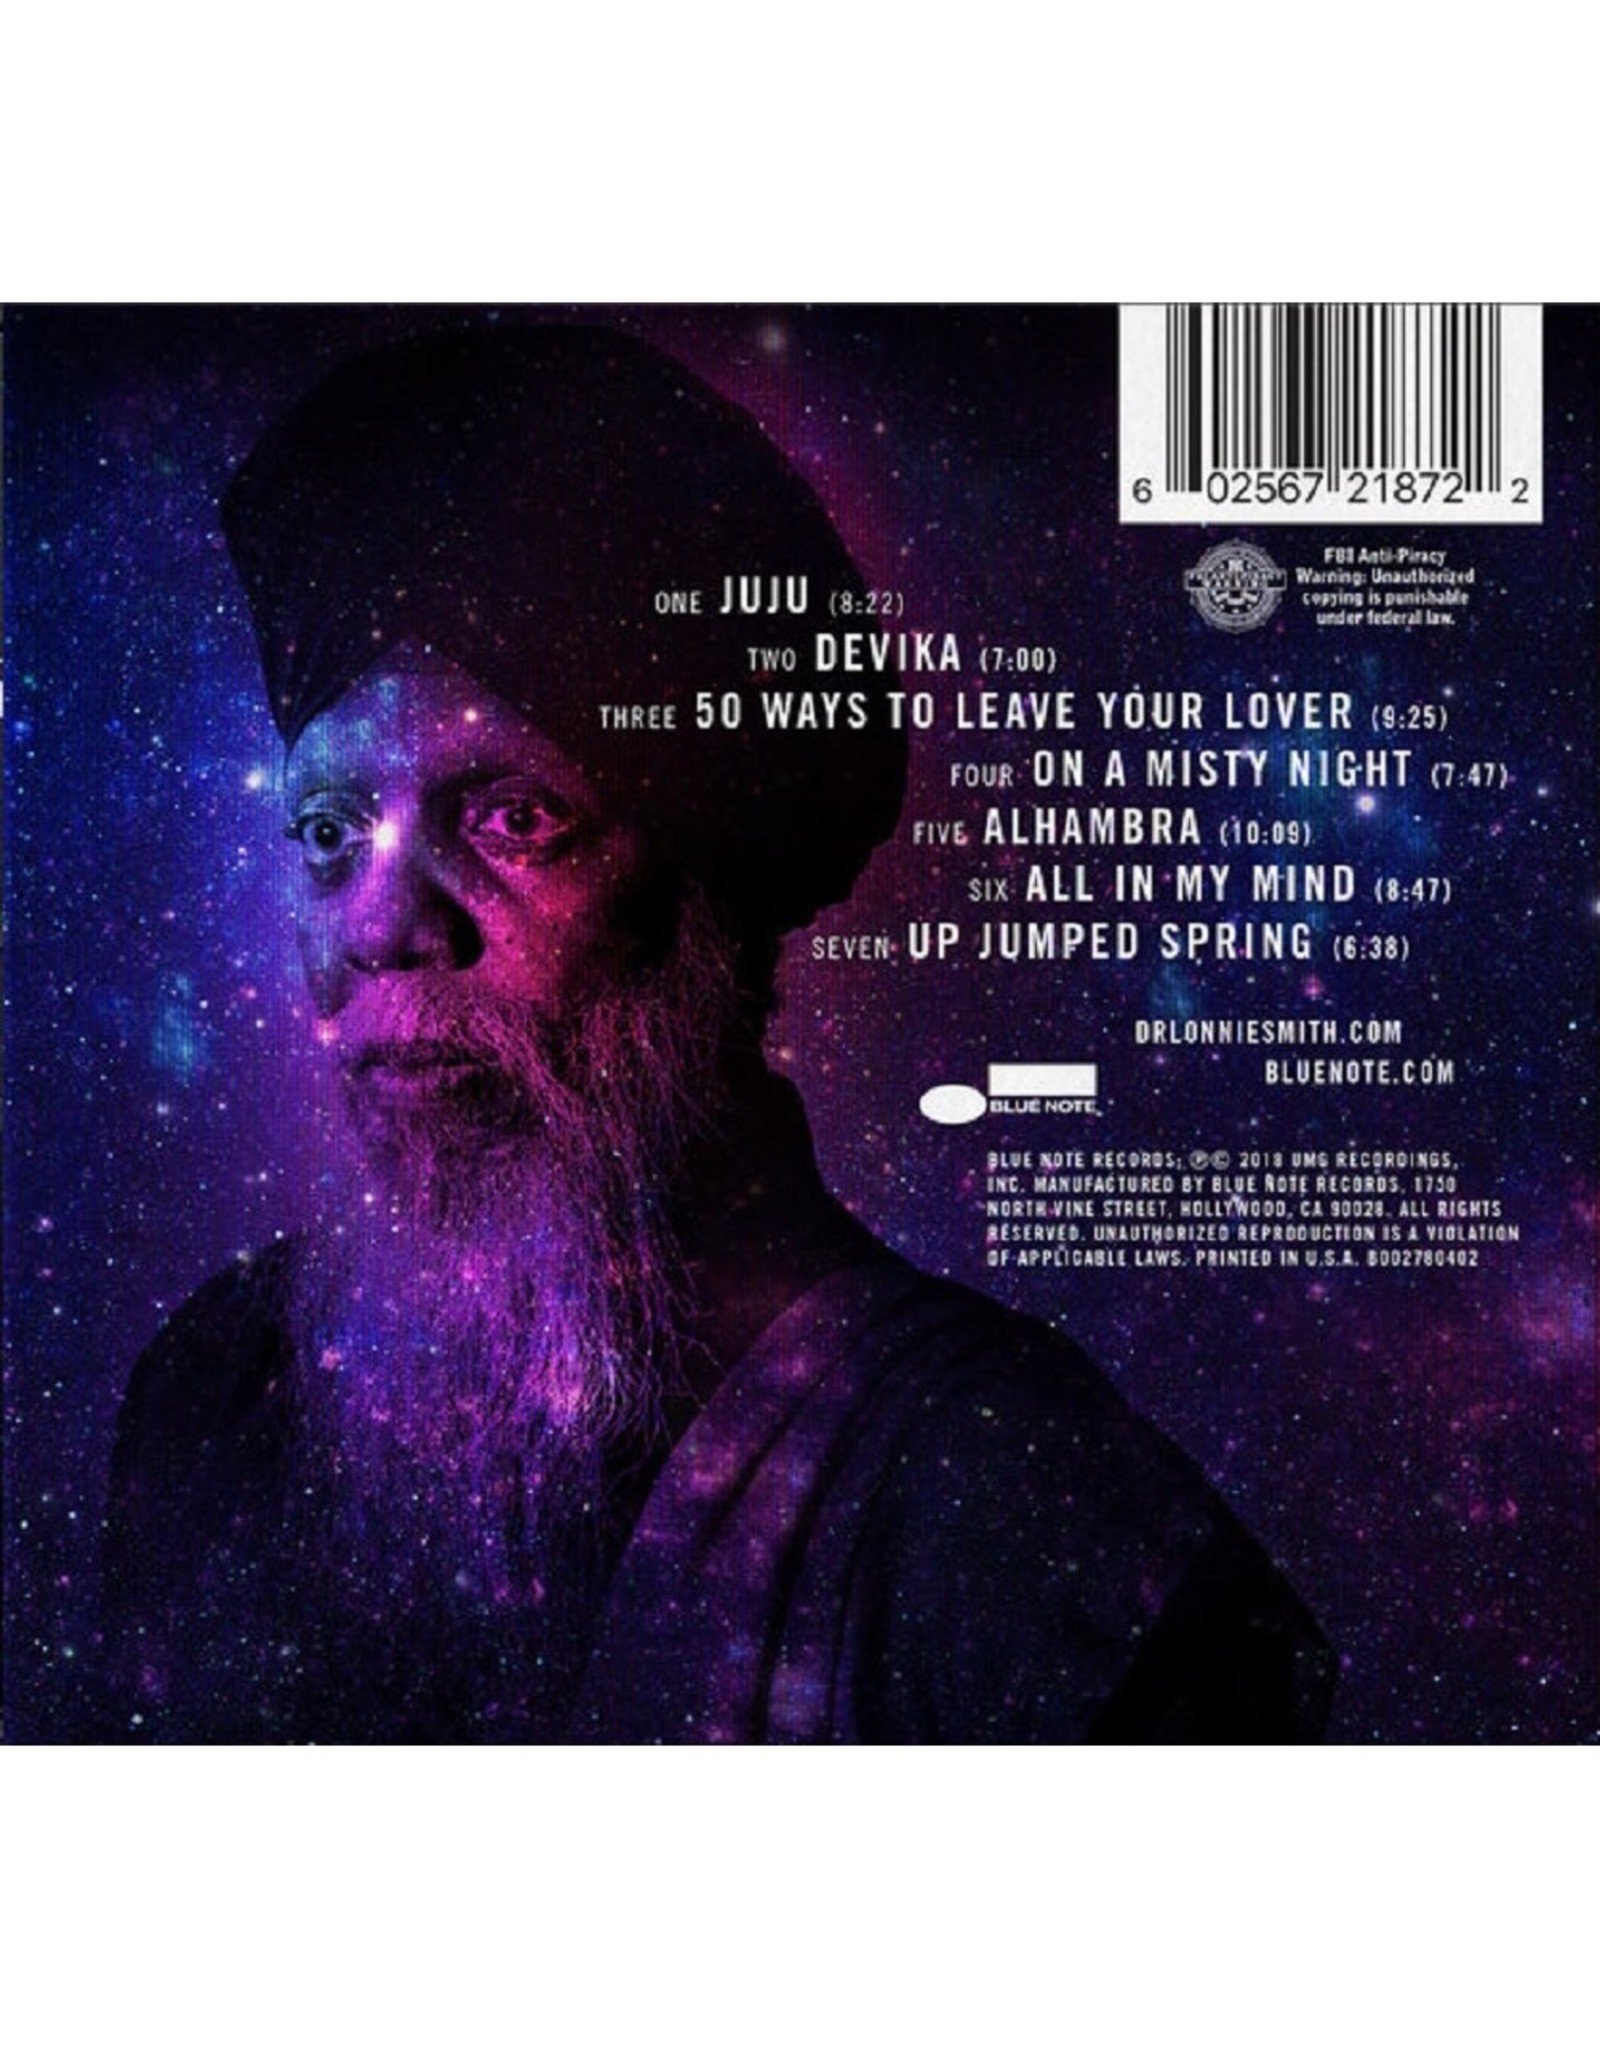 Lonnie Smith - All In My Mind (Blue Note Tone Poet)